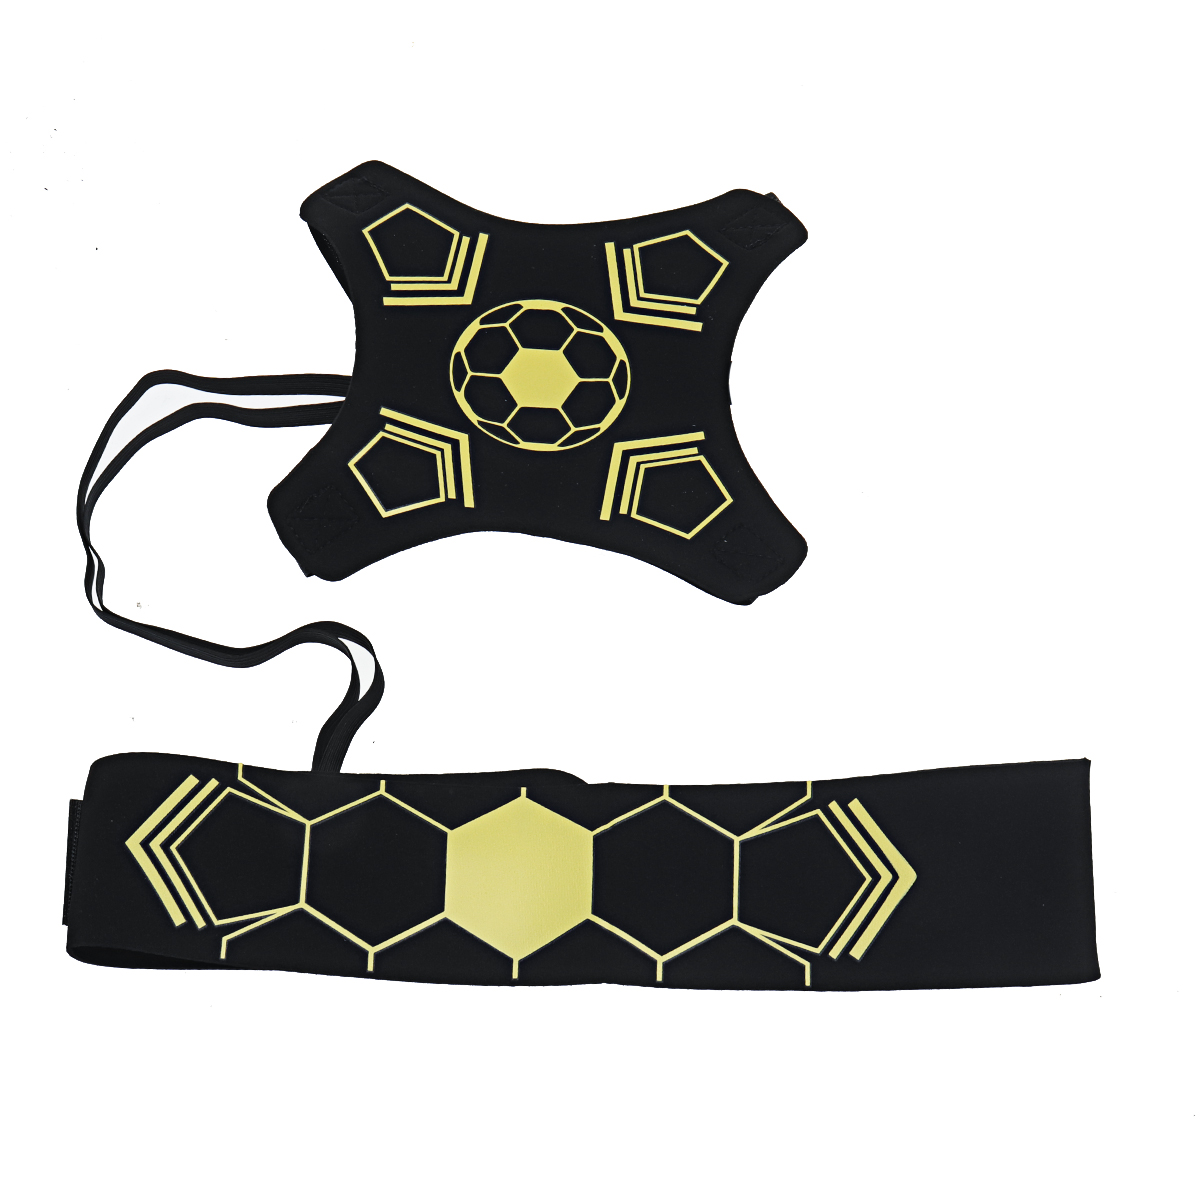 Youth-Soccer-Trainer-Hands-Free-Solo-SoccerVolleyballRugby-Trainer-Adjustable-Waist-Belt-Football-Tr-1727498-3